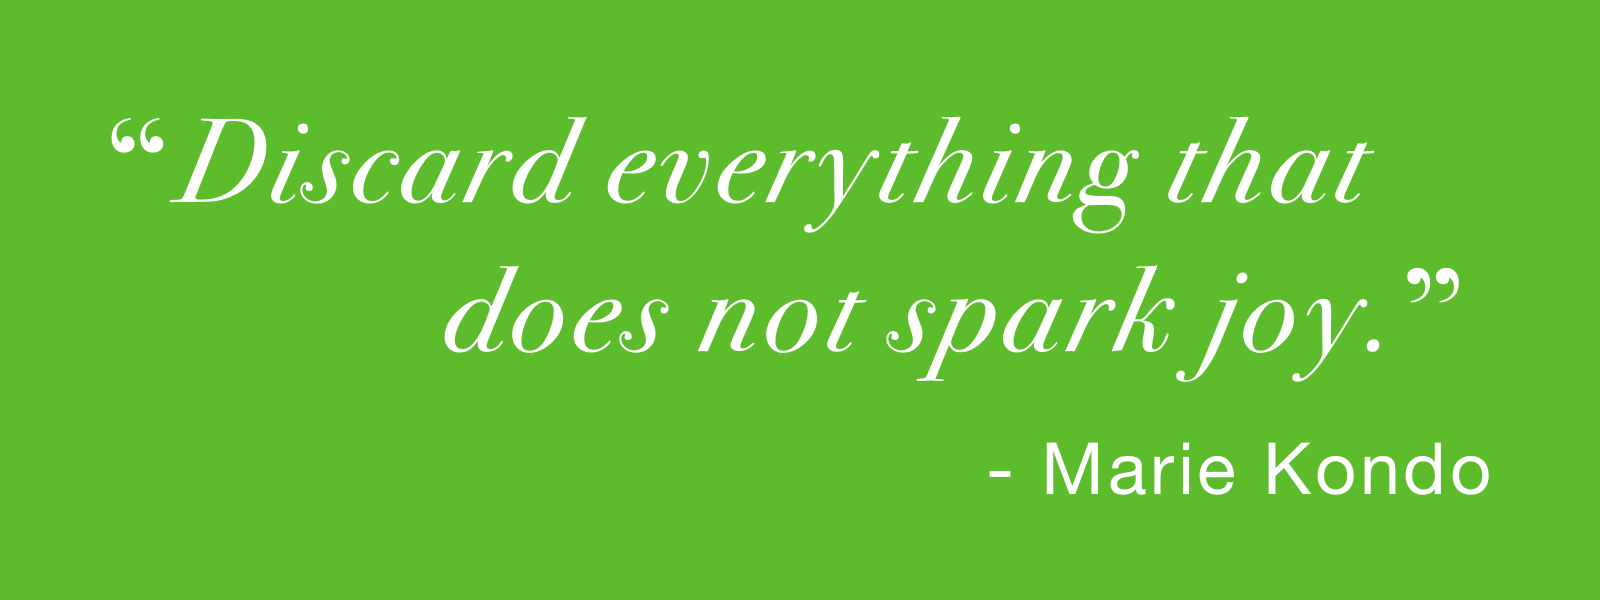 Discard everything that does not spark joy - Marie Kondo